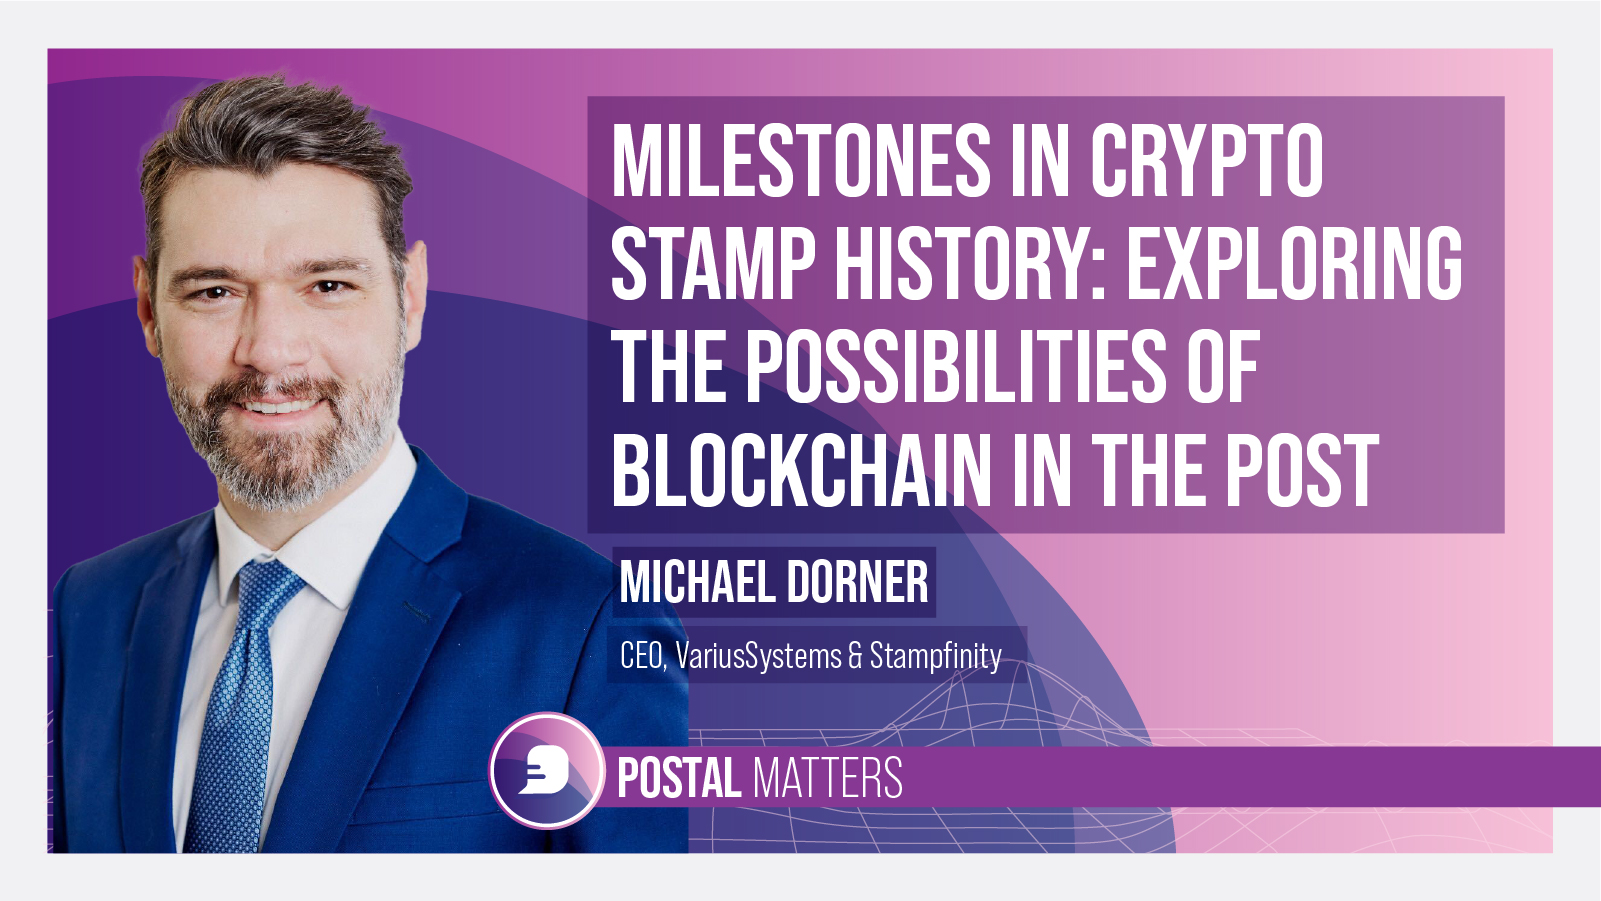 Milestones in crypto stamp history: Exploring the possibilities of blockchain in the Post